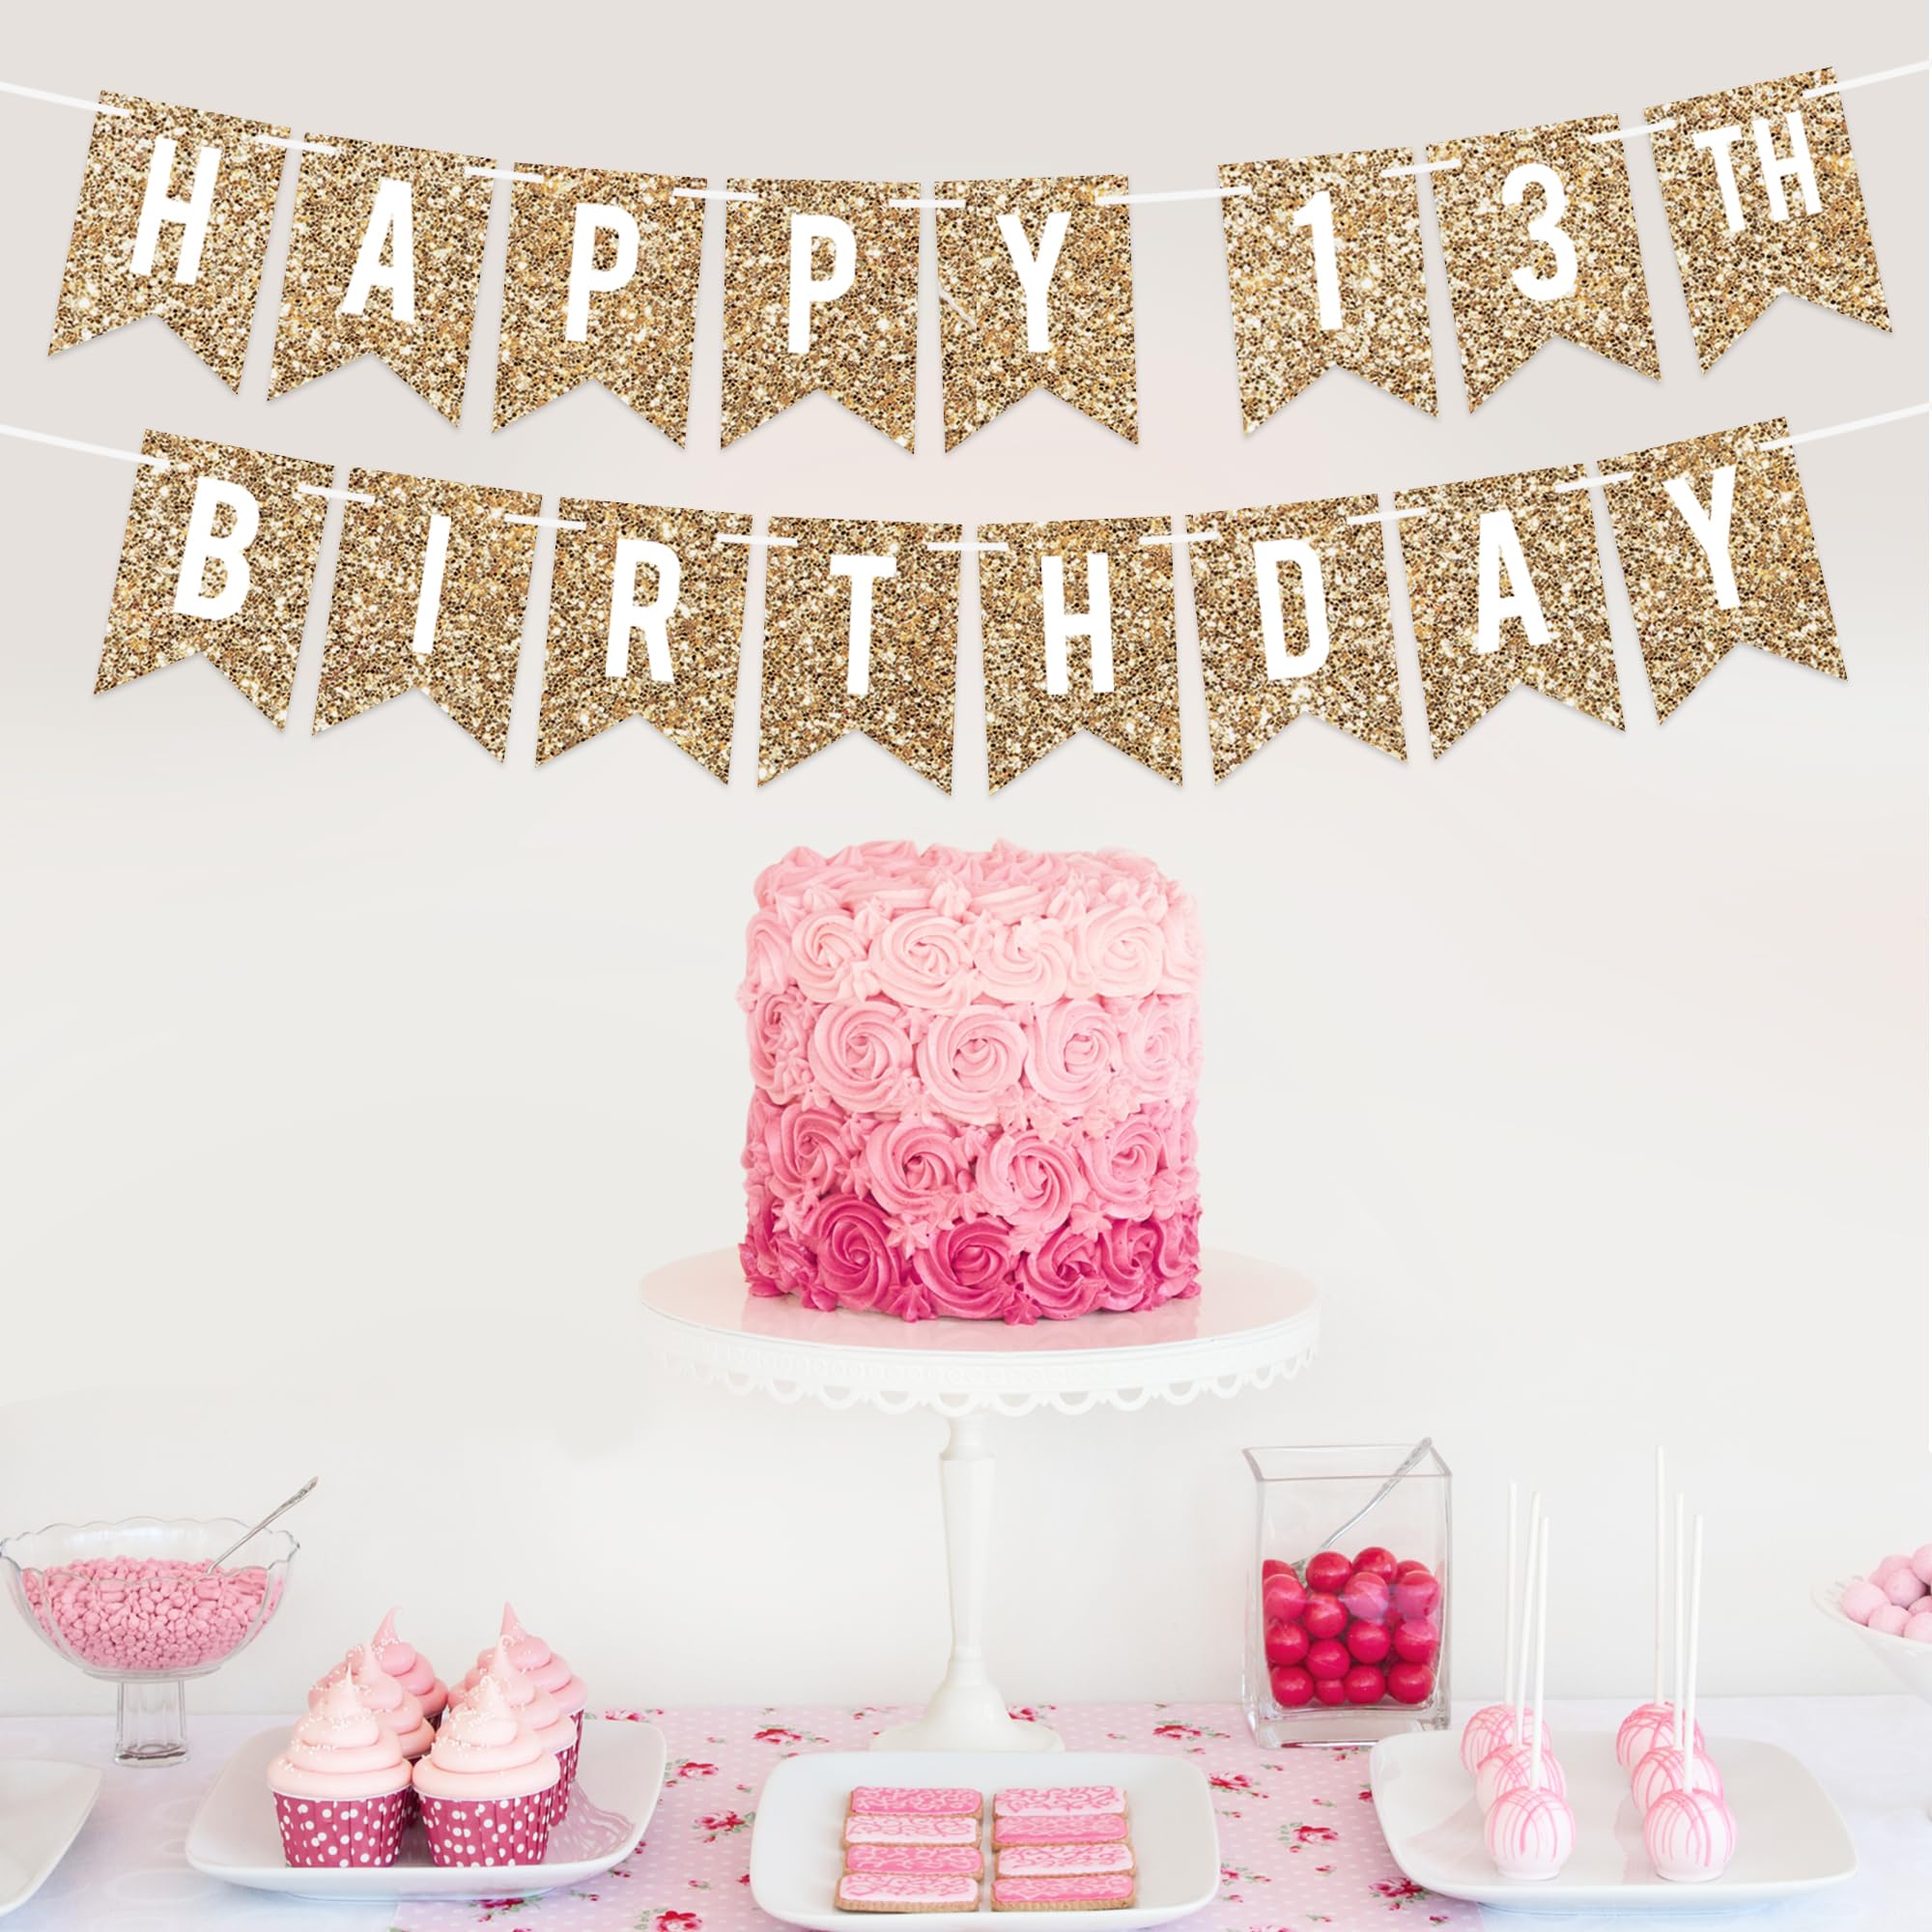 Pre-Strung Happy 13th Birthday Banner - NO DIY - Gold Glitter 13th Birthday Party Banner For Boys Girls - Pre-Strung Garland on 6 ft Strands - Gold Birthday Party Decorations & Decor. Did we mention